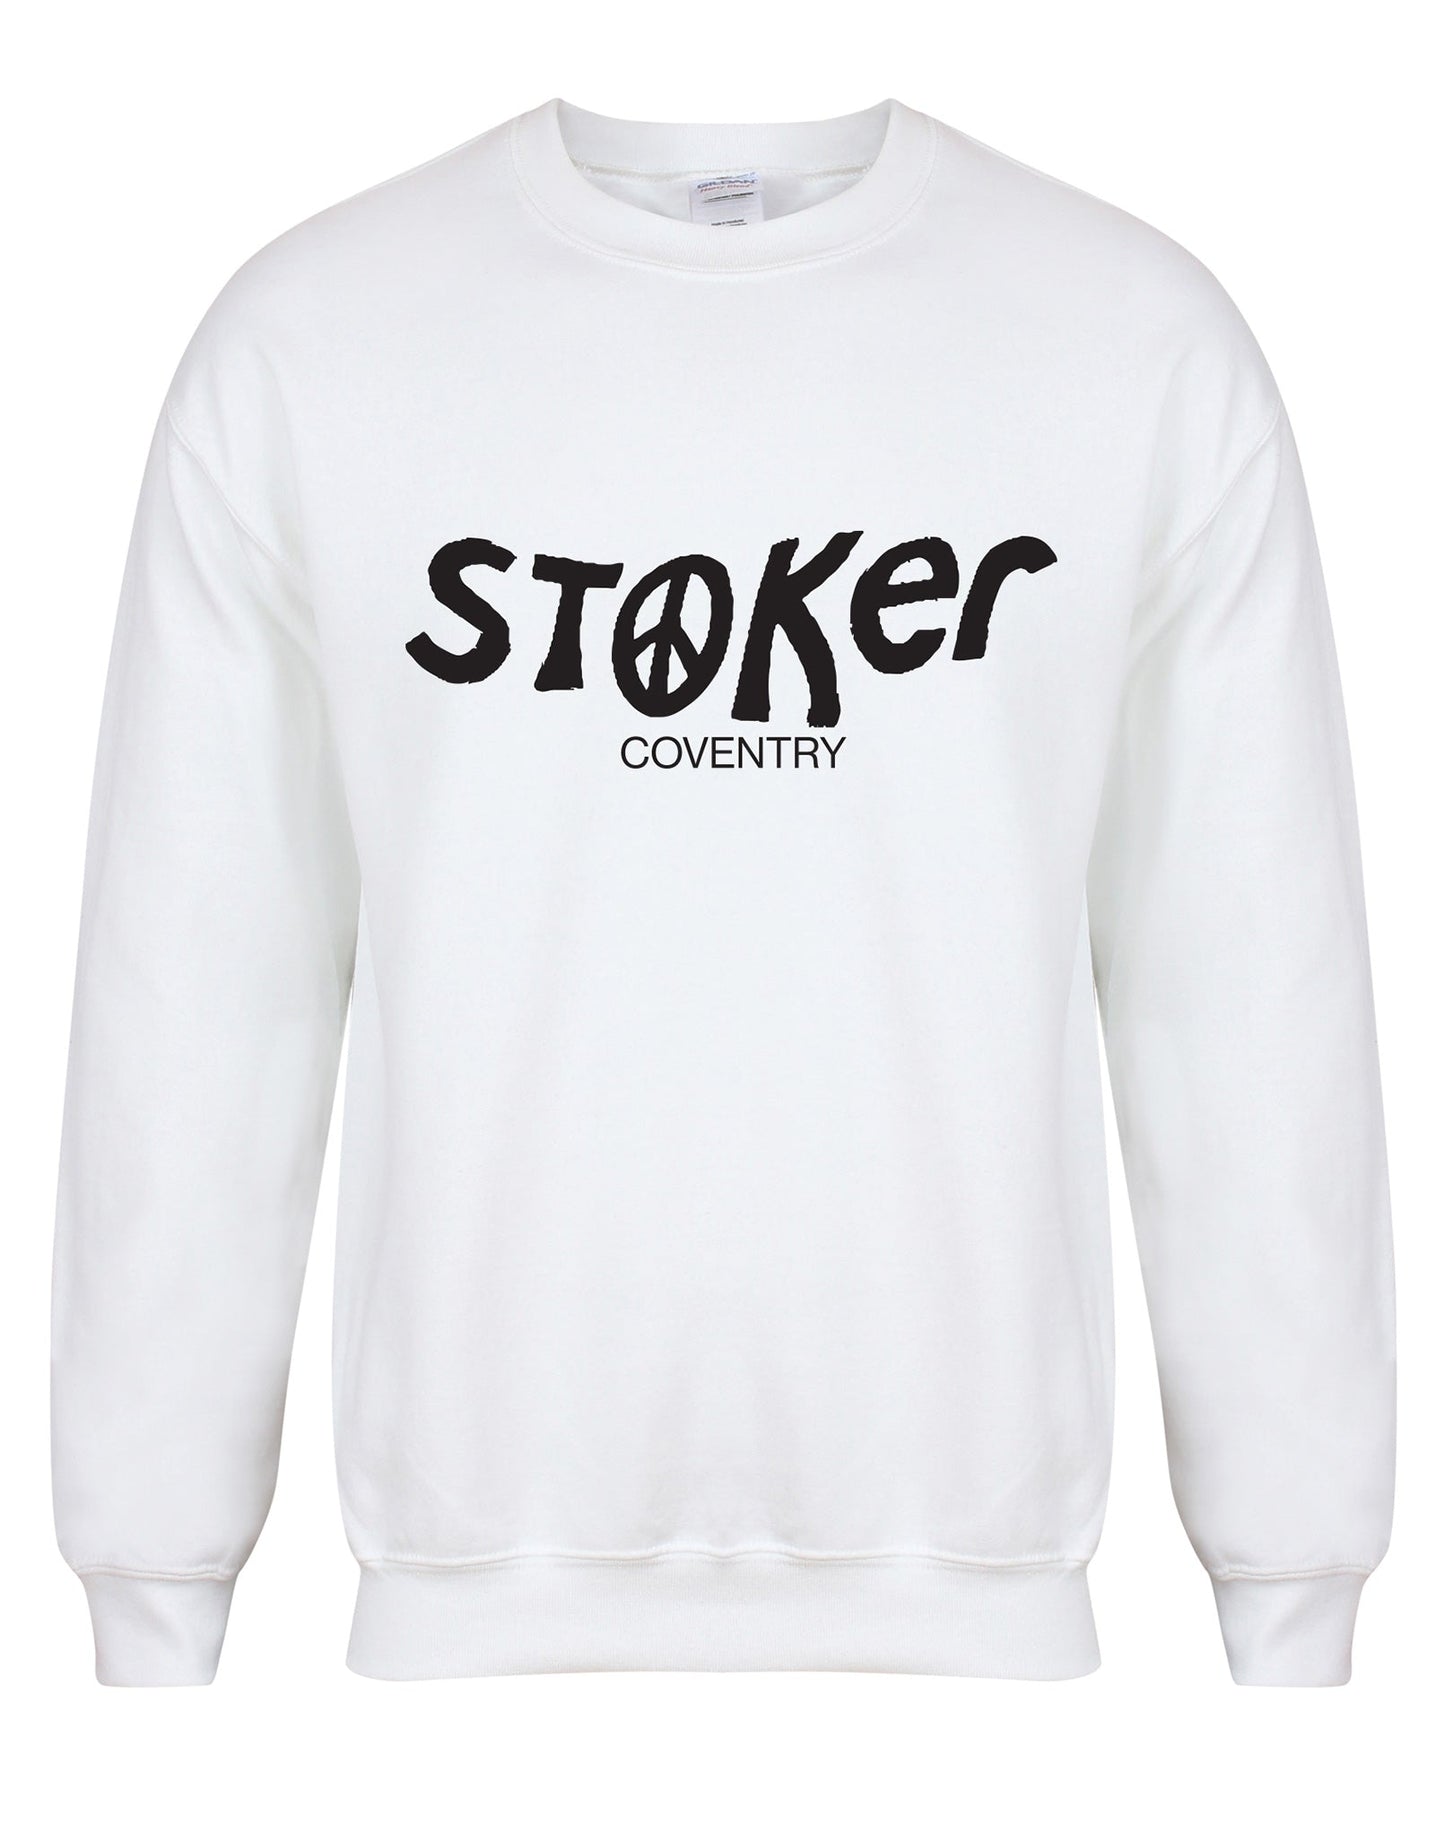 Stoker unisex fit sweatshirt - various colours - Dirty Stop Outs